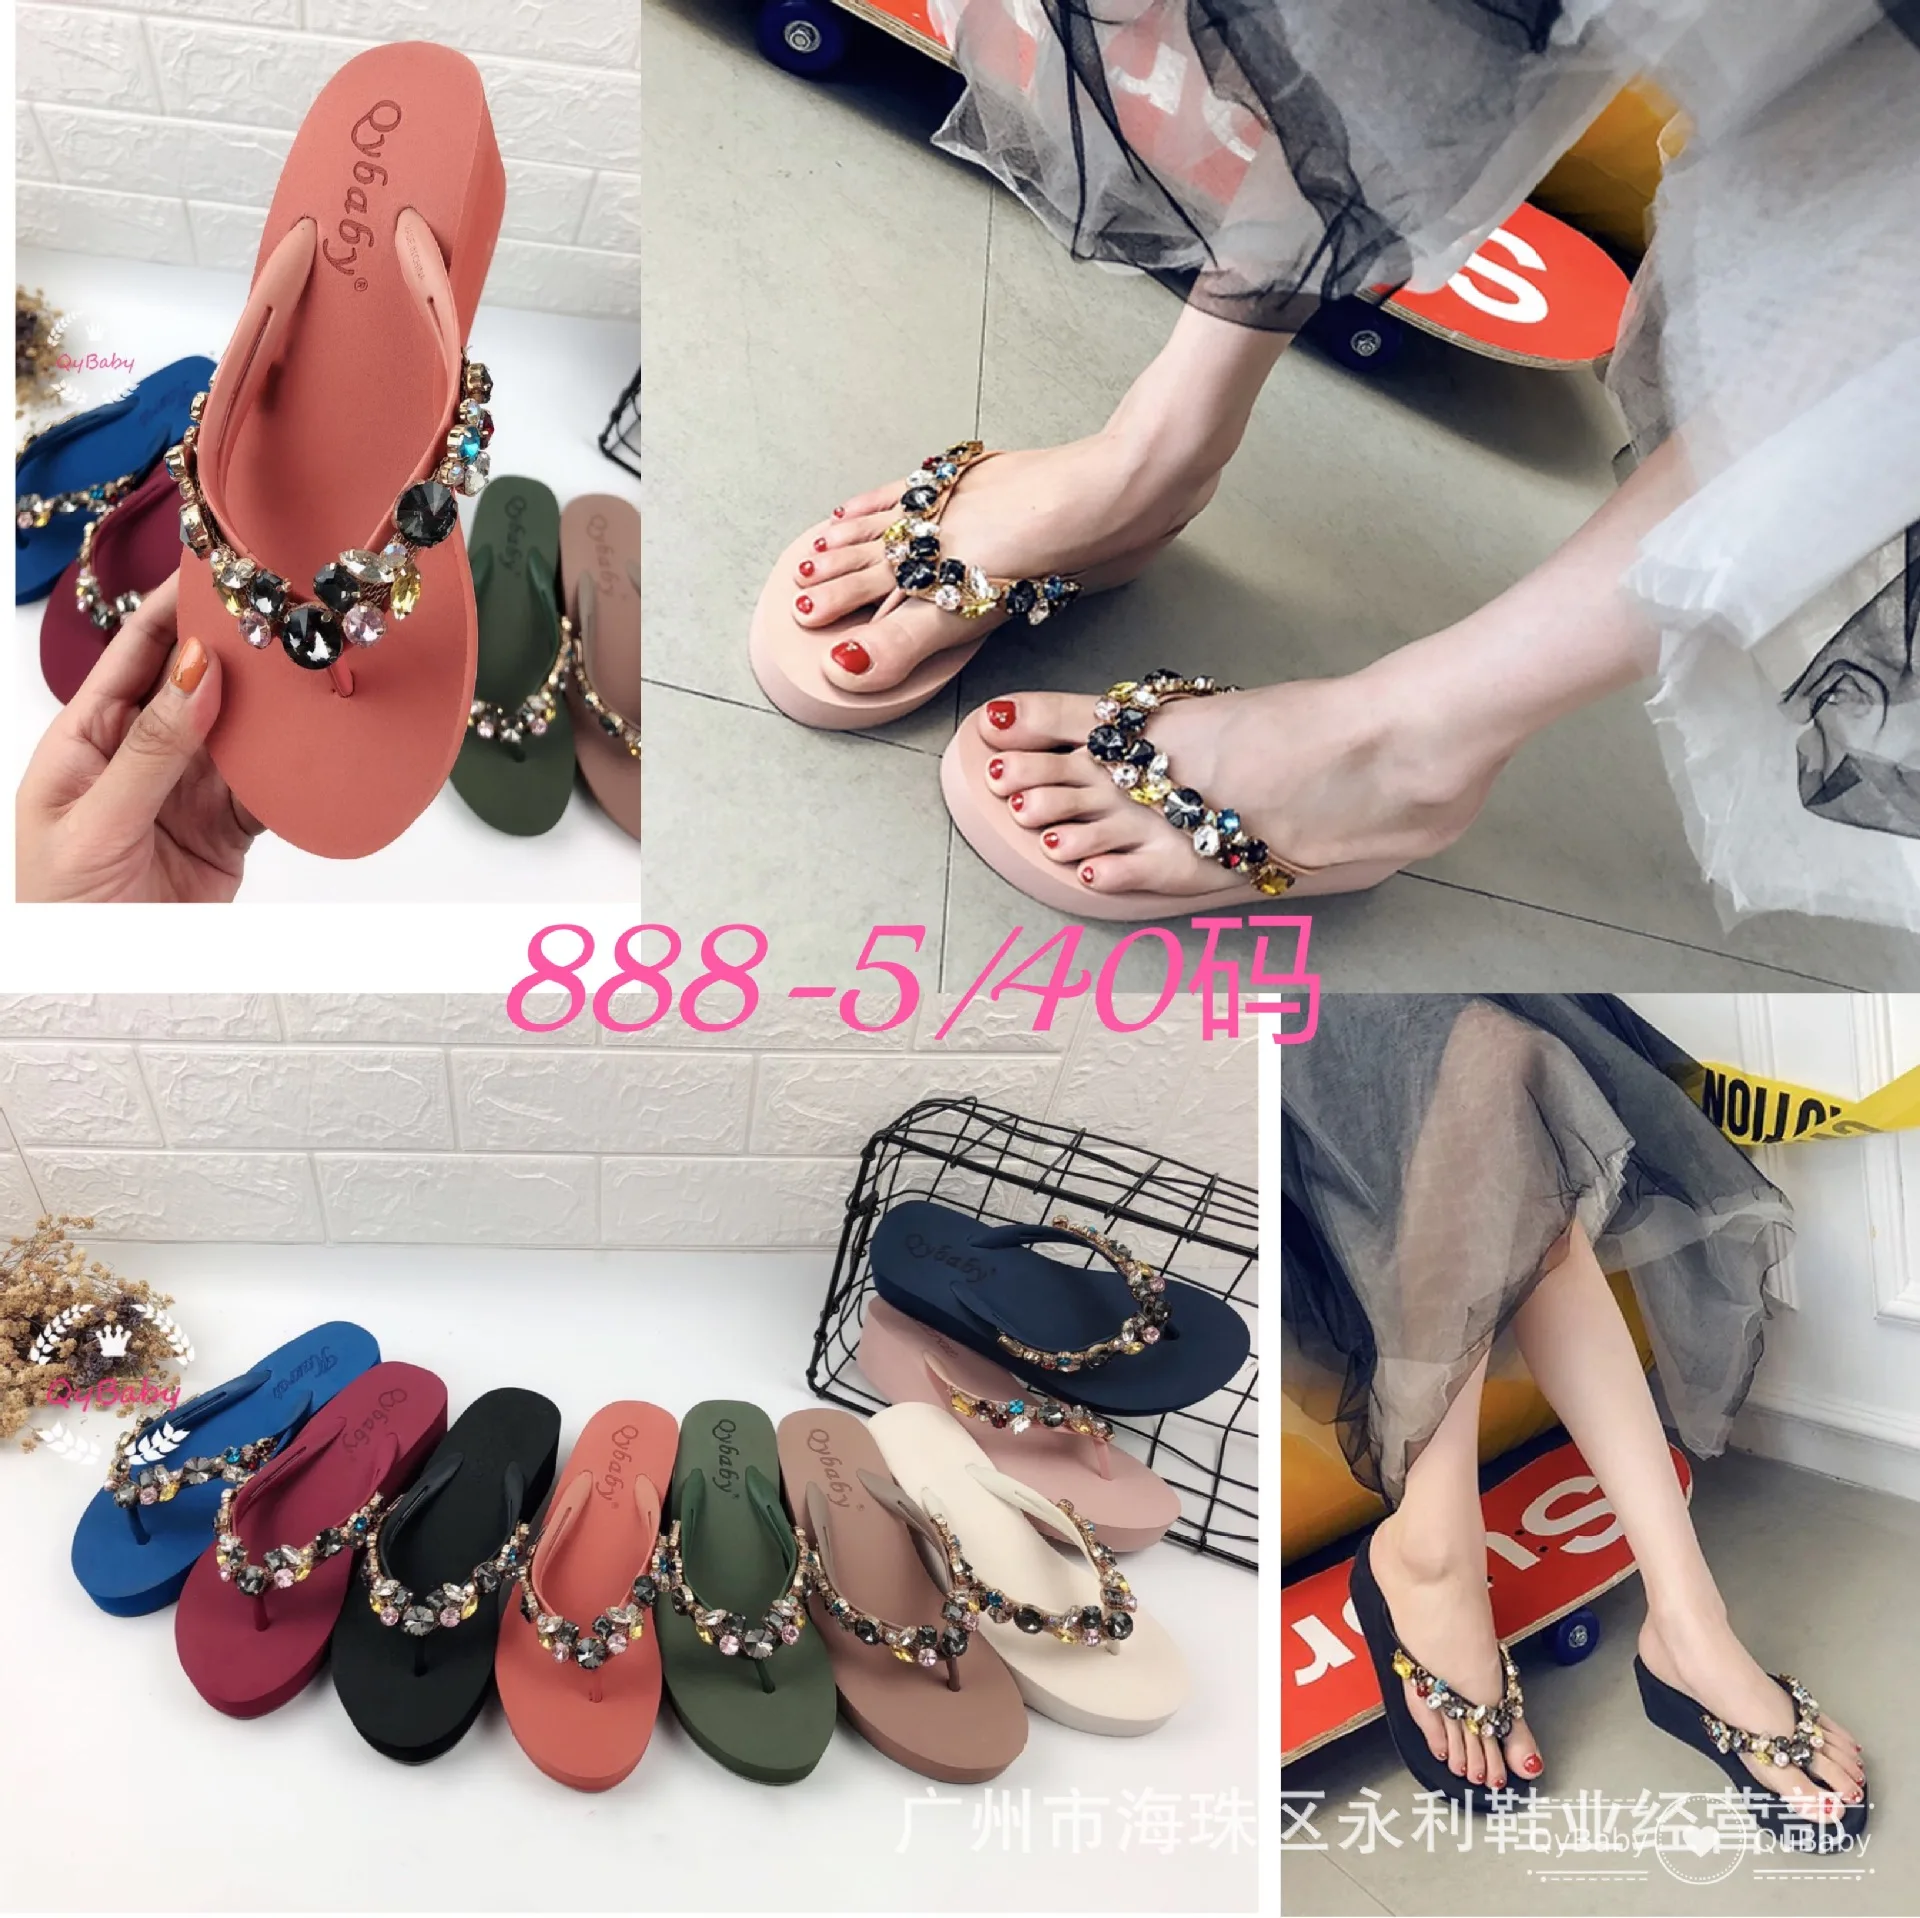 

Multicolored Sandals Med Beach Shoes Glitter Slides Rubber Flip Flops Slippers Soft On A Wedge Sabot Jelly Hawaiian Comfort PU T